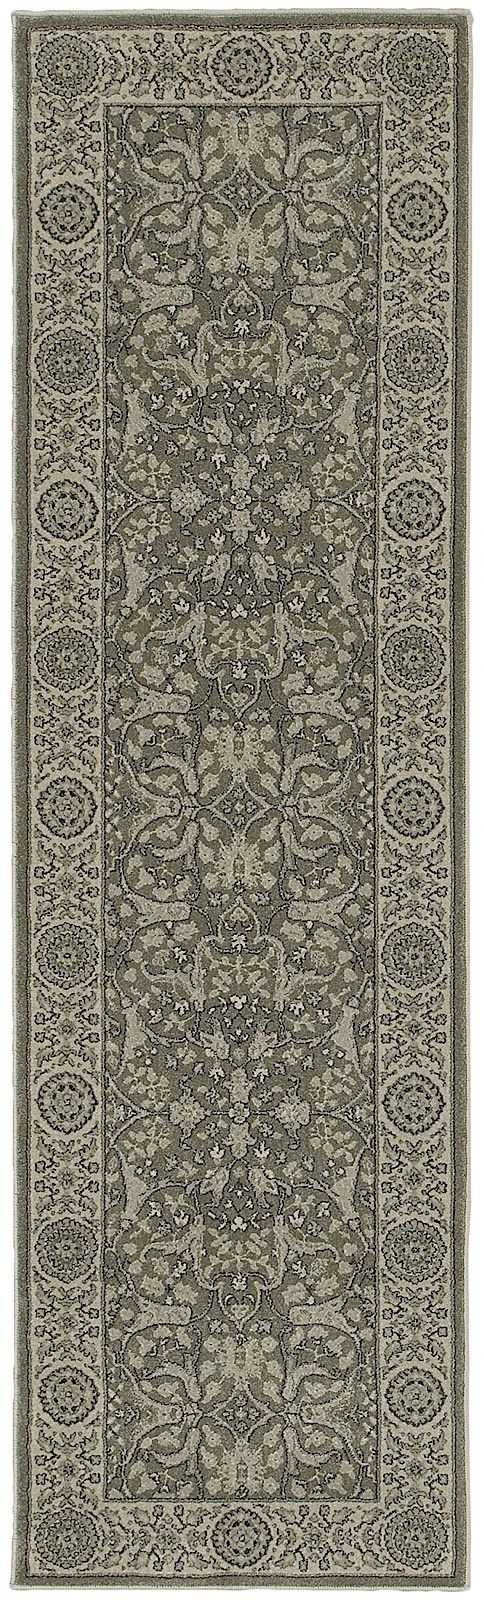 oriental weavers richmond traditional area rug collection